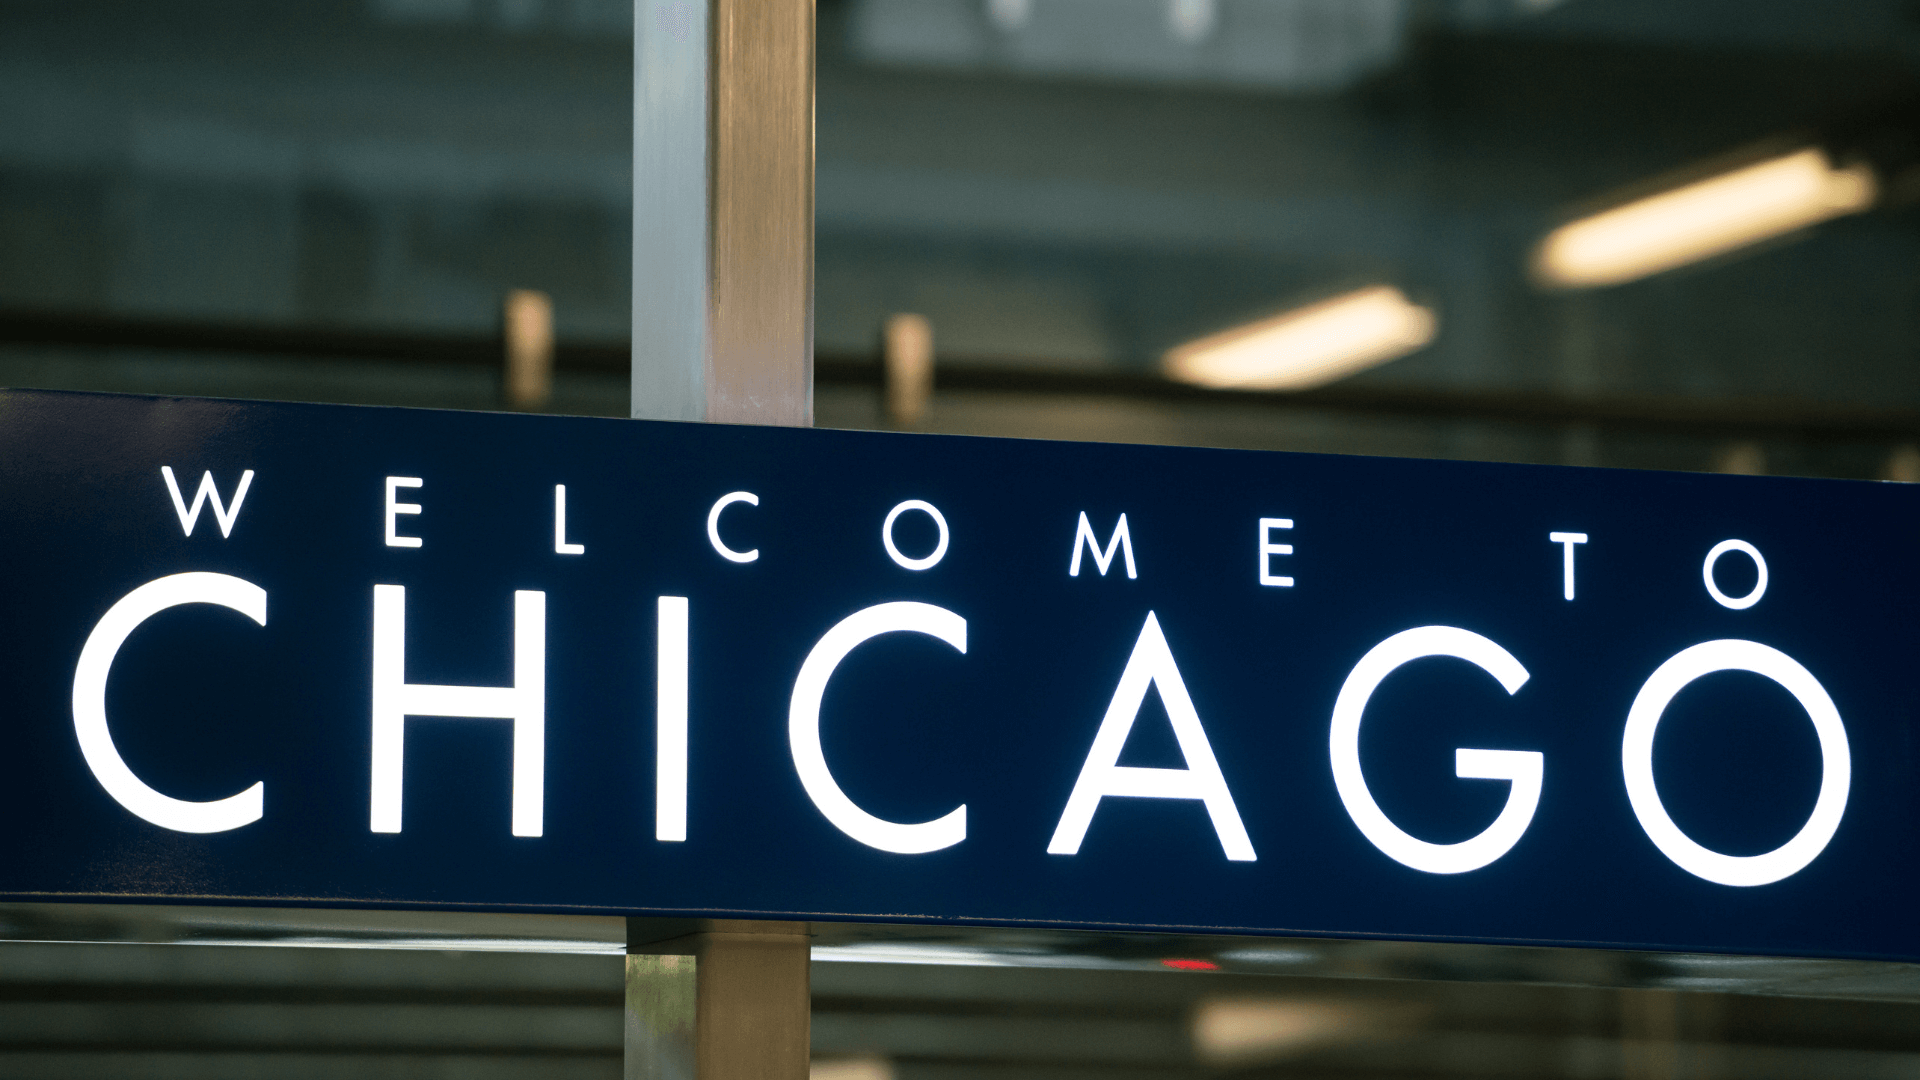 Chicago sign at airport